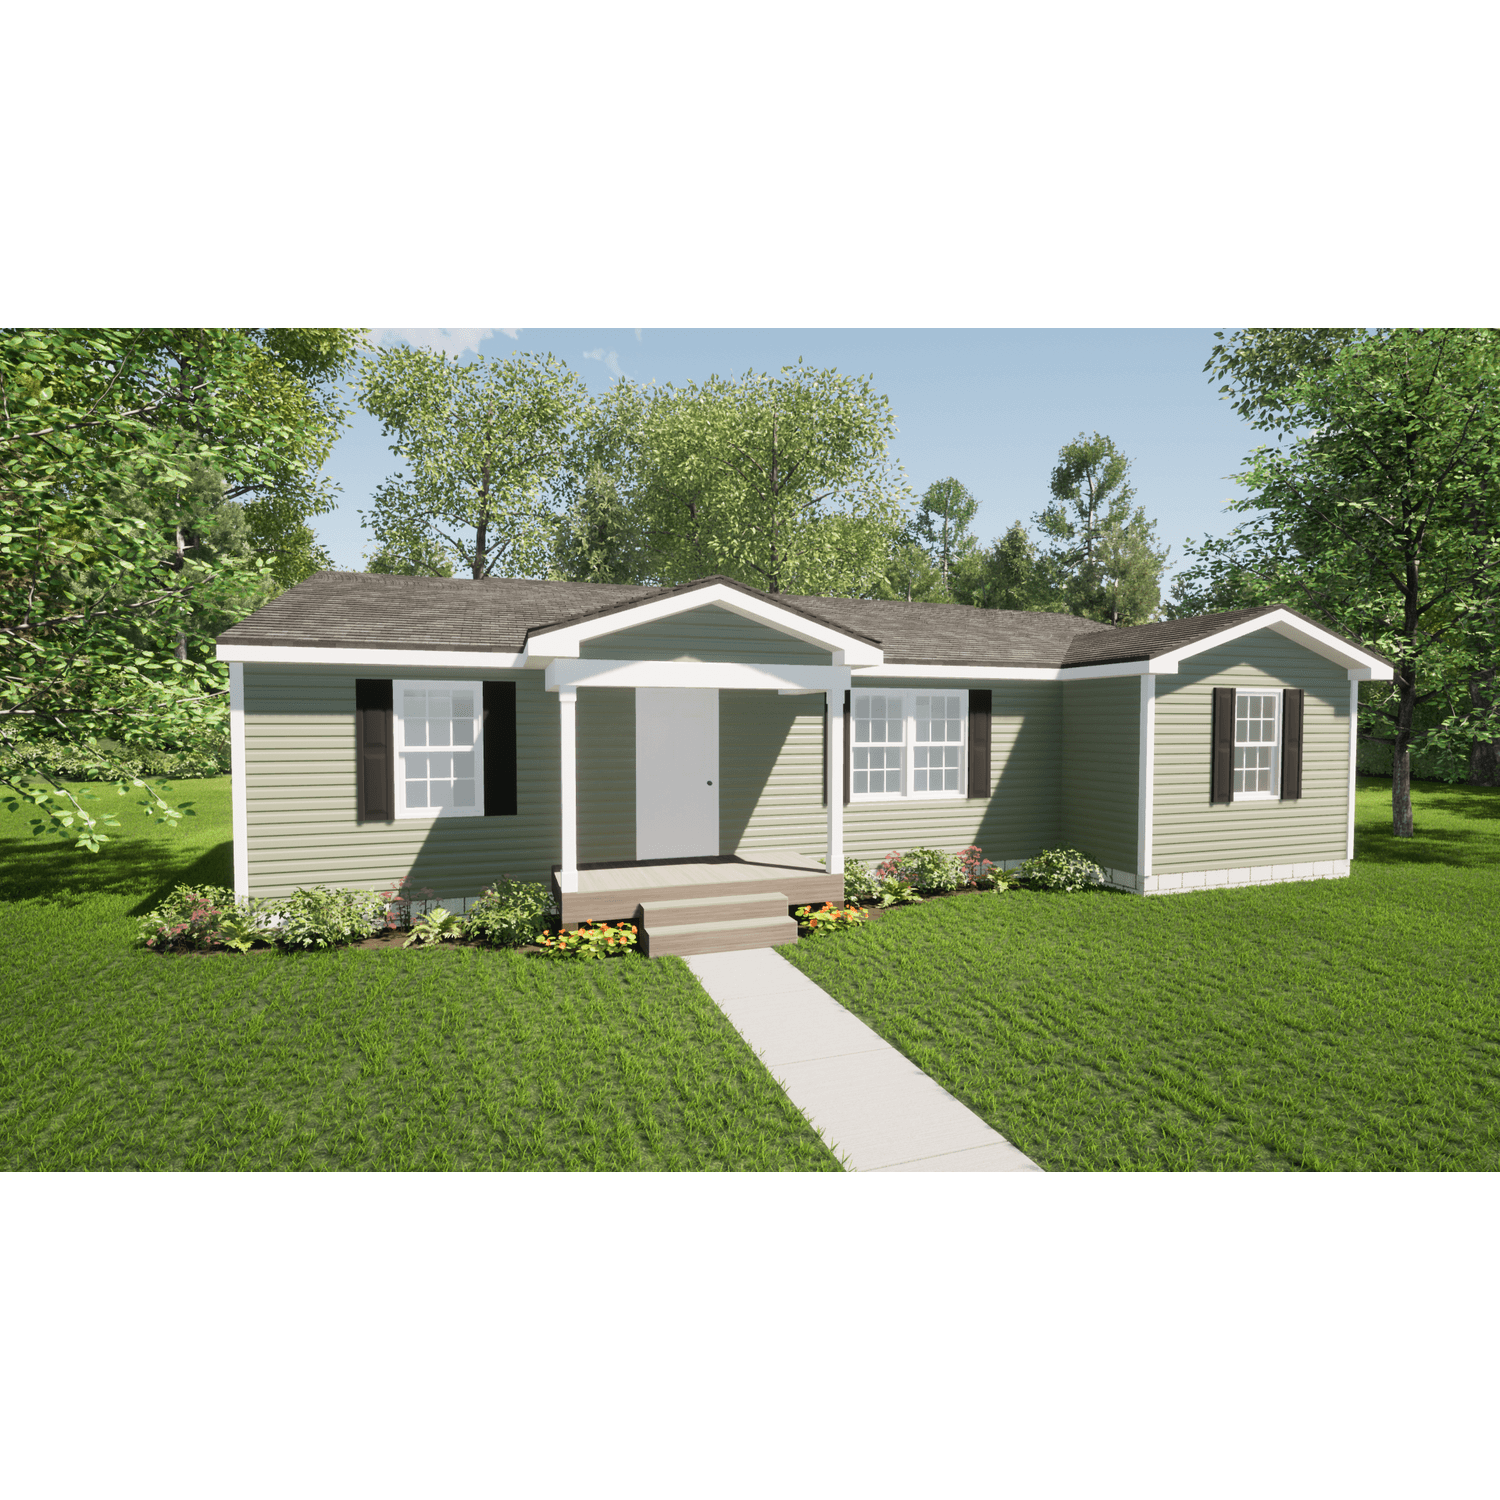 2. Single Family for Sale at Valuebuild Homes - Greenville Nc - Build On Your L 3015 Jefferson Davis Highway (Us1), Greenville, NC 27858